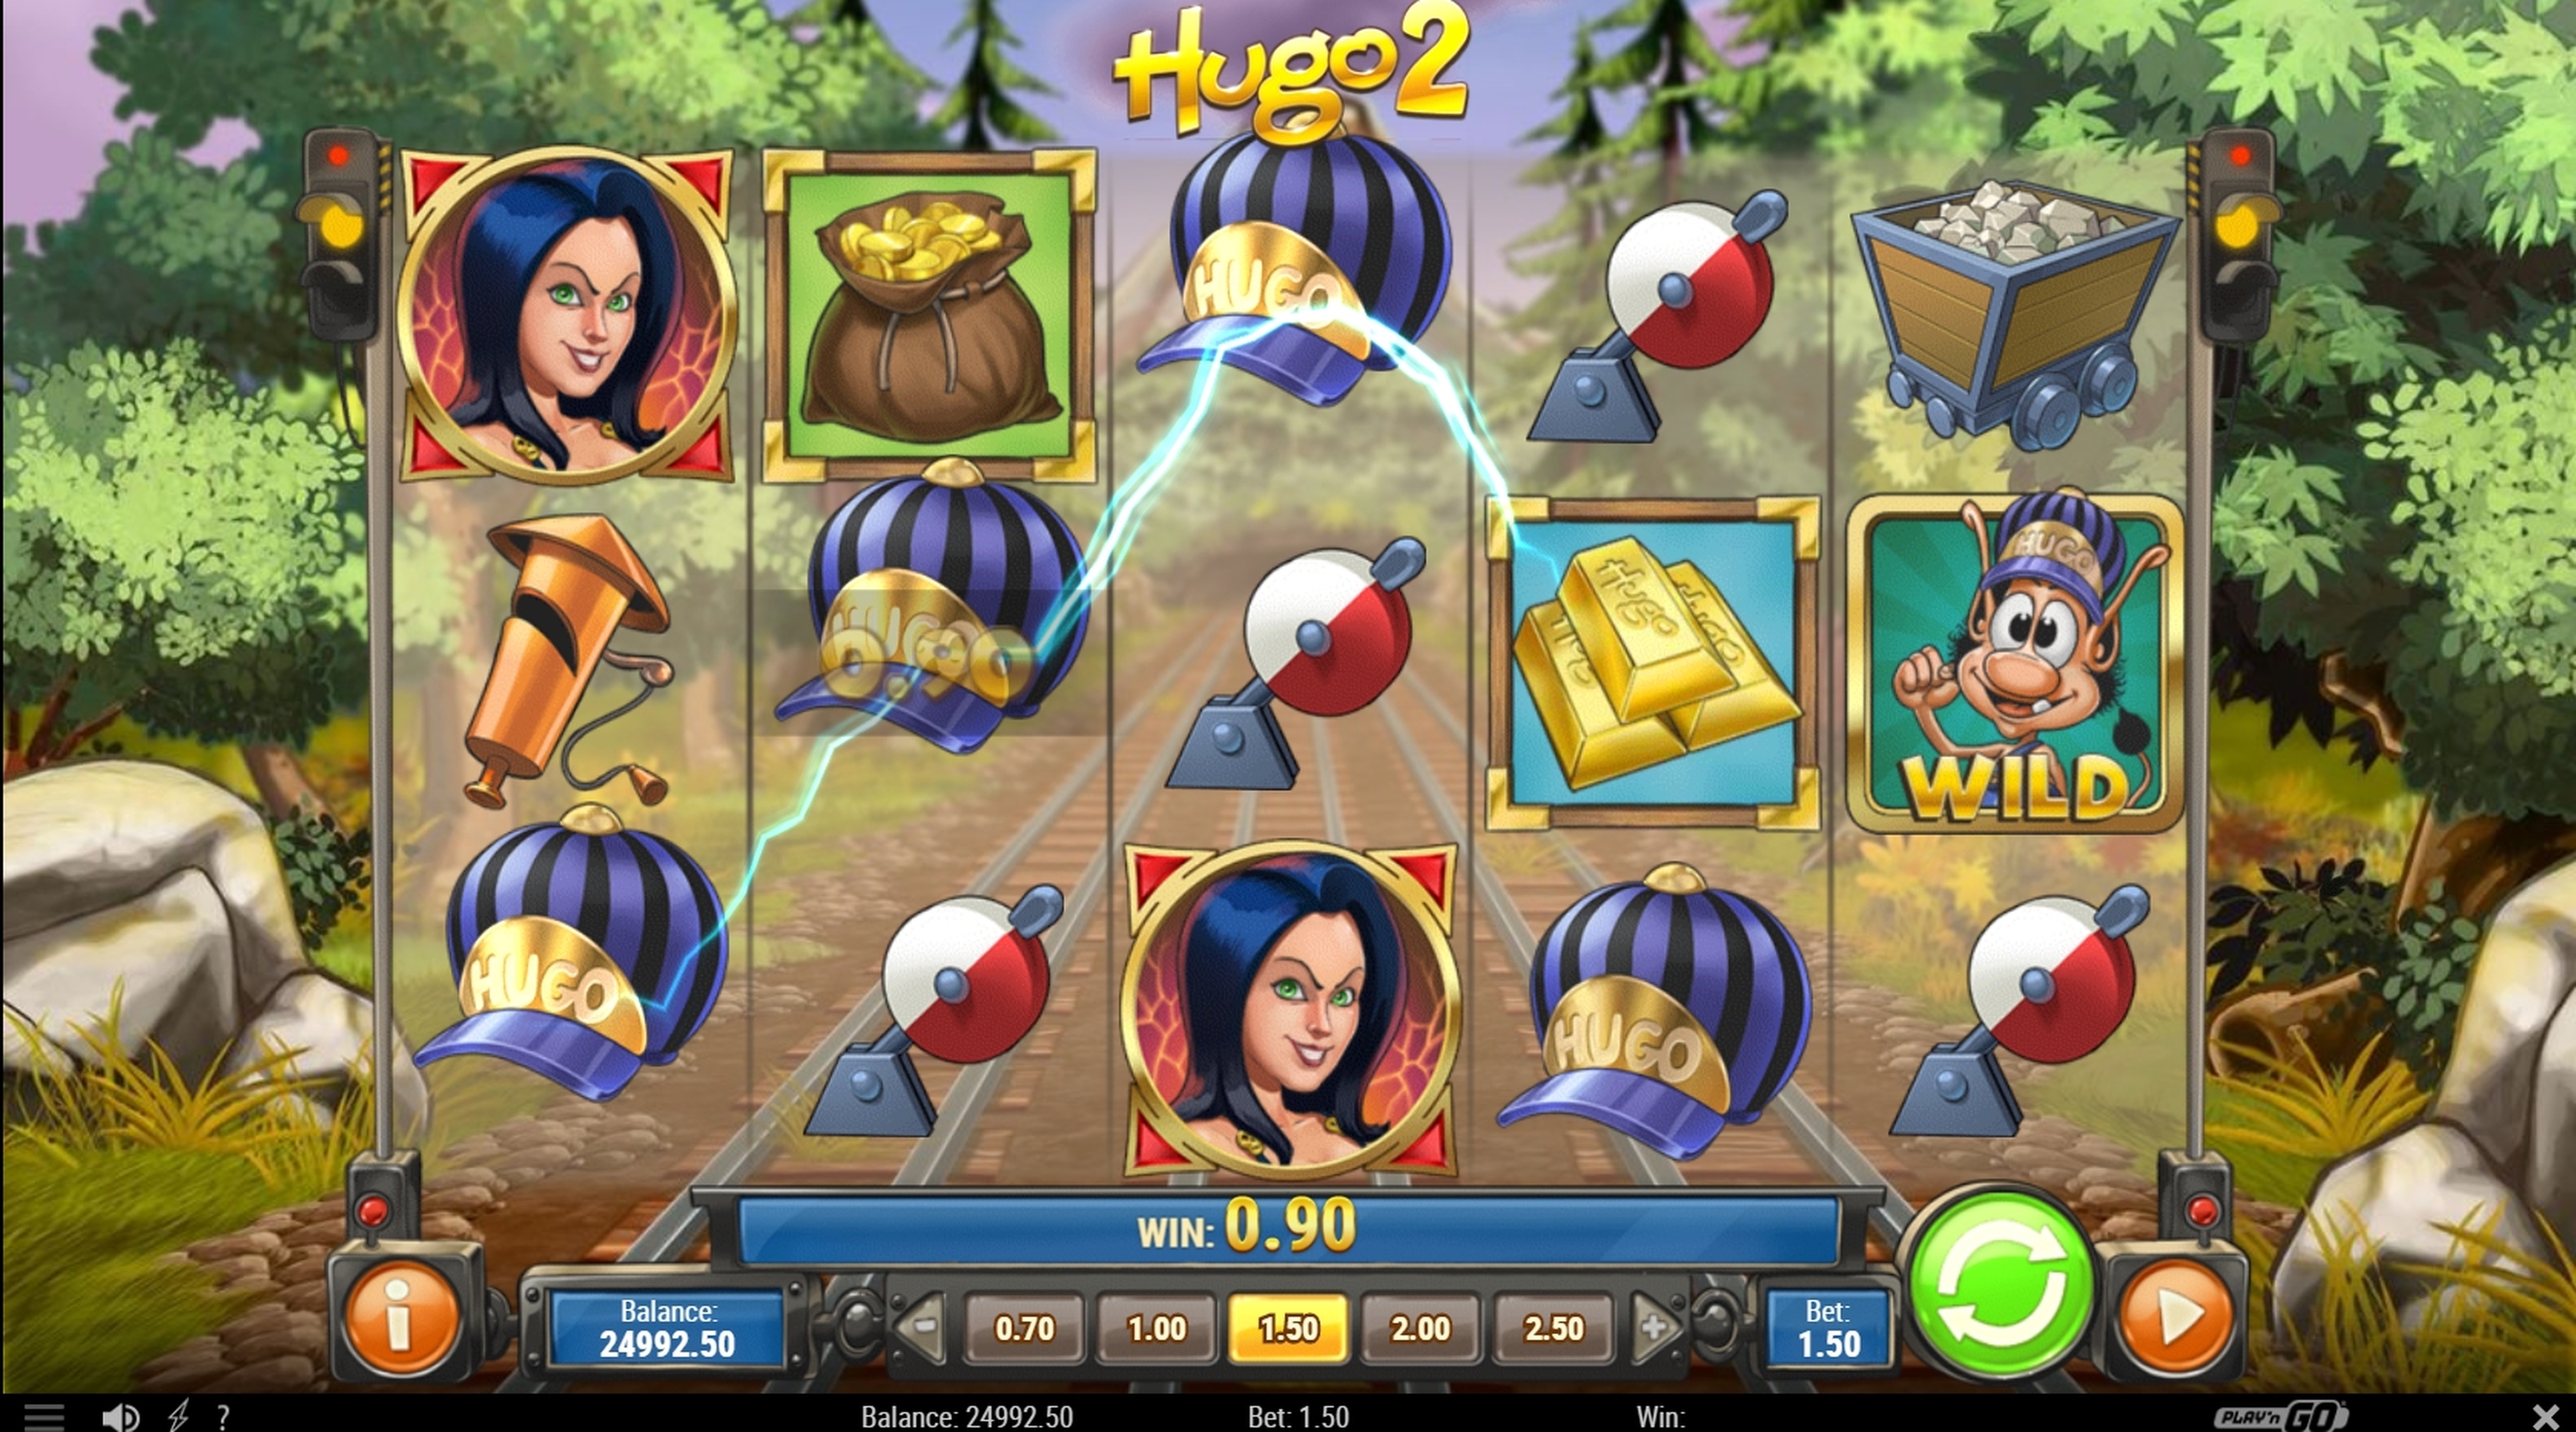 Win Money in Hugo 2 Free Slot Game by Playn GO